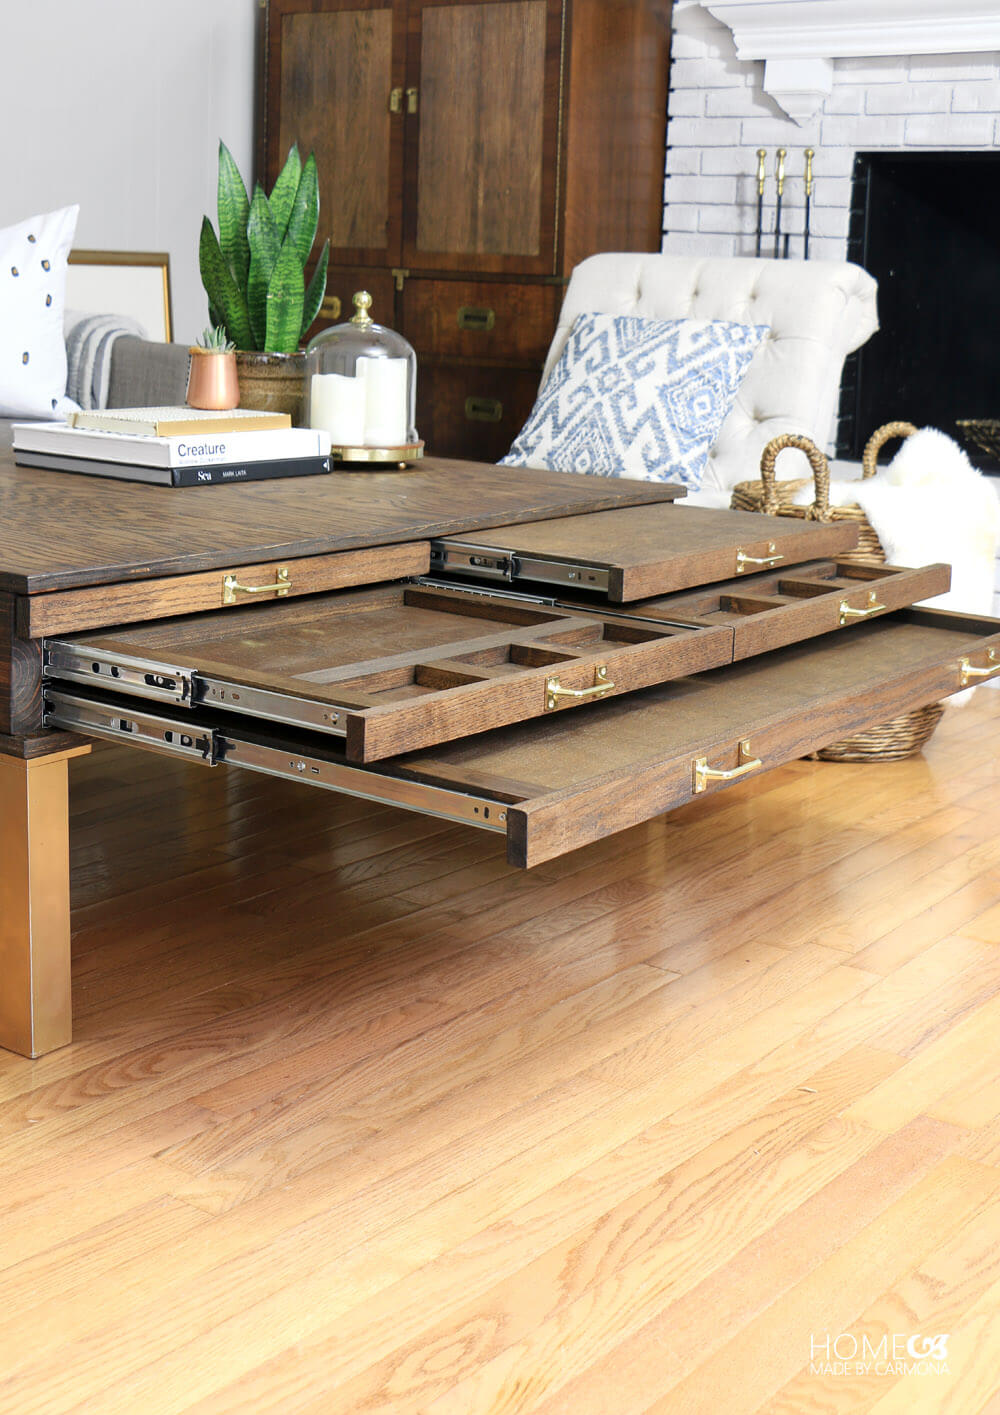 DIY Coffee Table With Storage Compartments